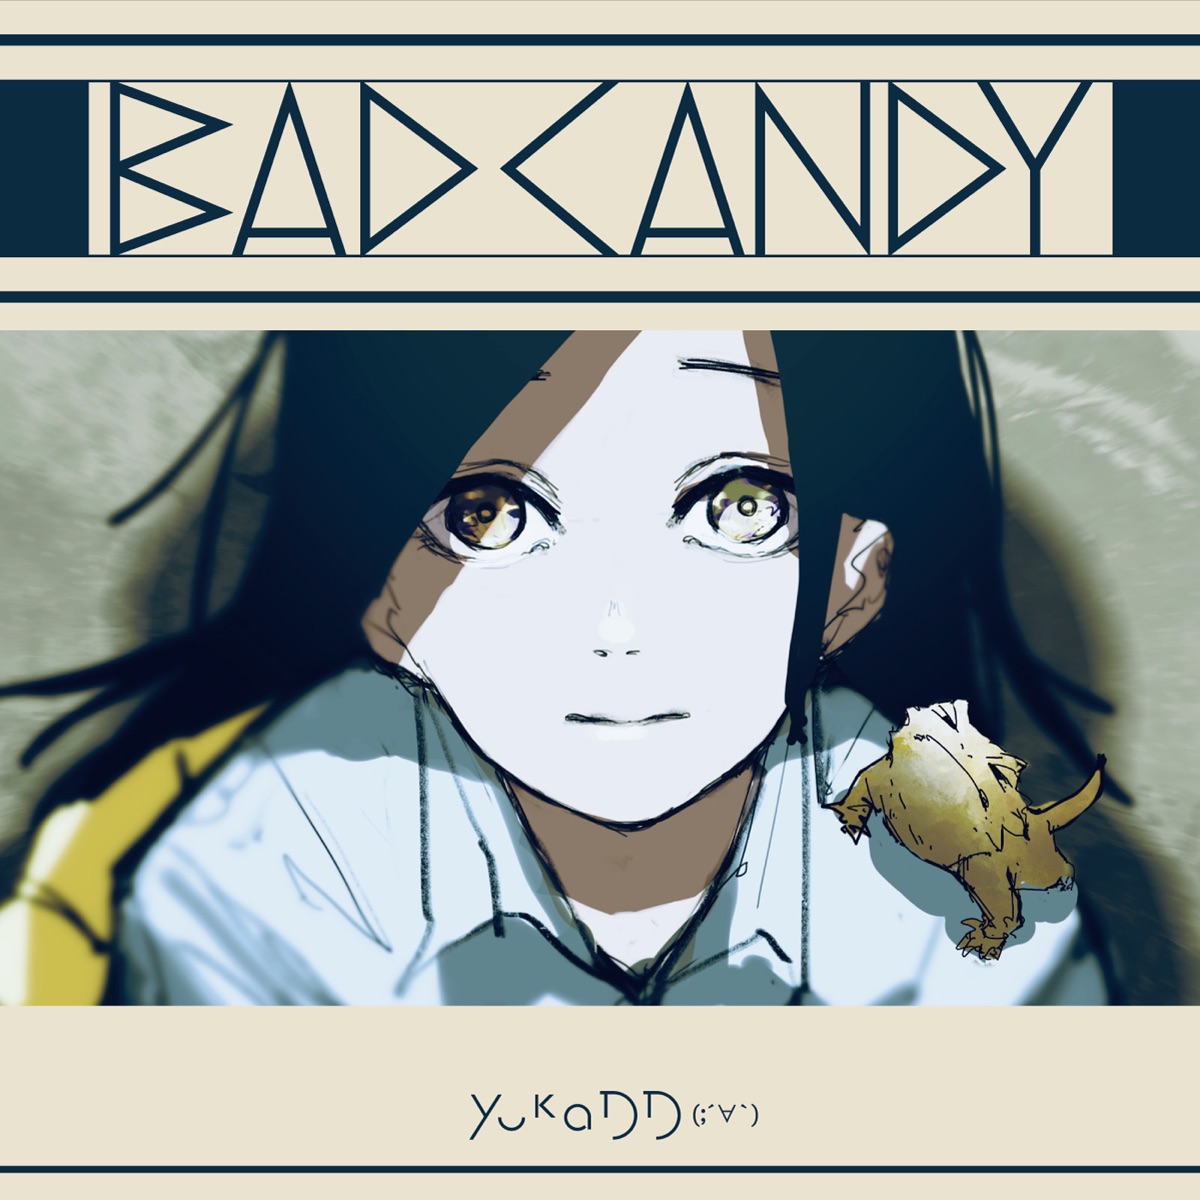 Cover for『yukaDD(;´∀`) - BAD CANDY』from the release『BAD CANDY』